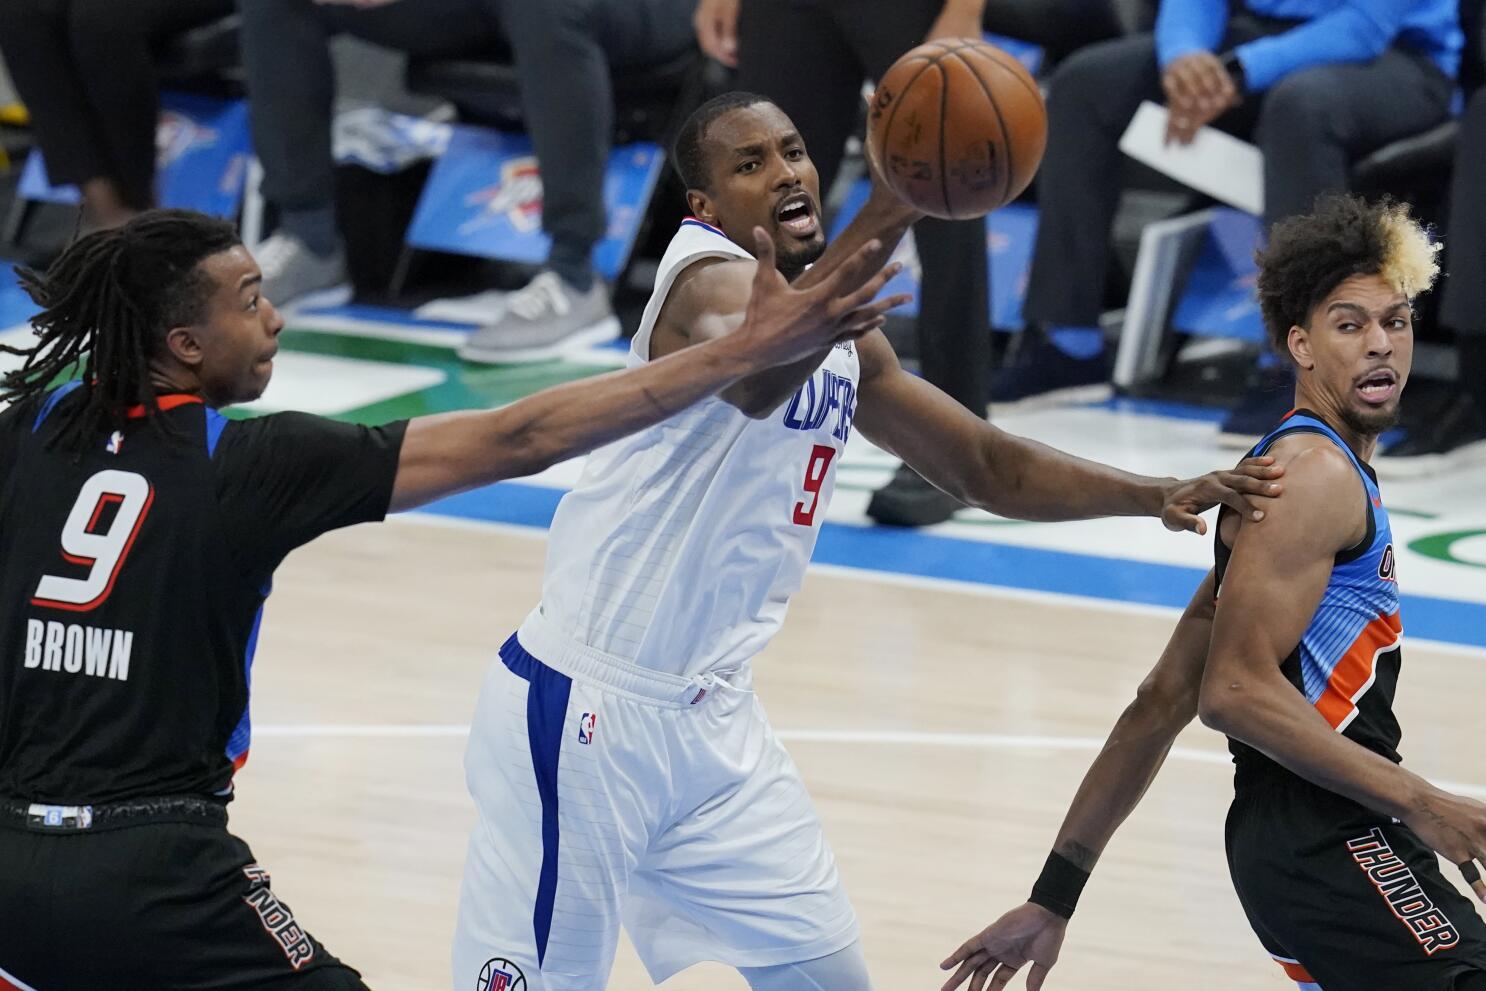 Mann leads Clippers over Thunder as stars rest for playoffs